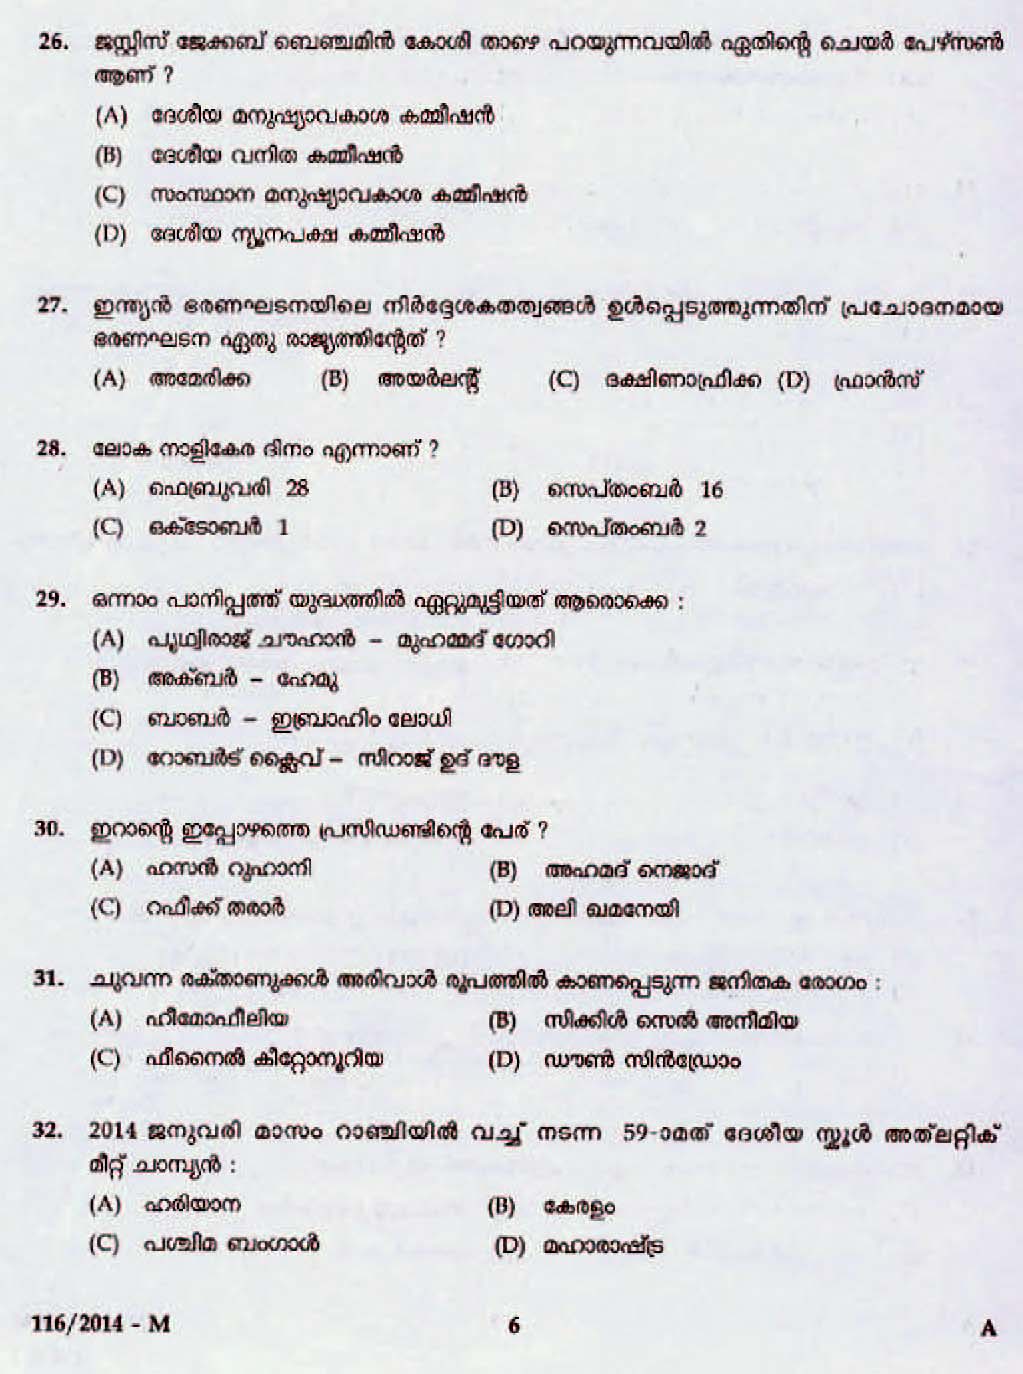 LD Clerk Various All Districts Question Paper Malayalam 2014 Paper Code 1162014 M 4